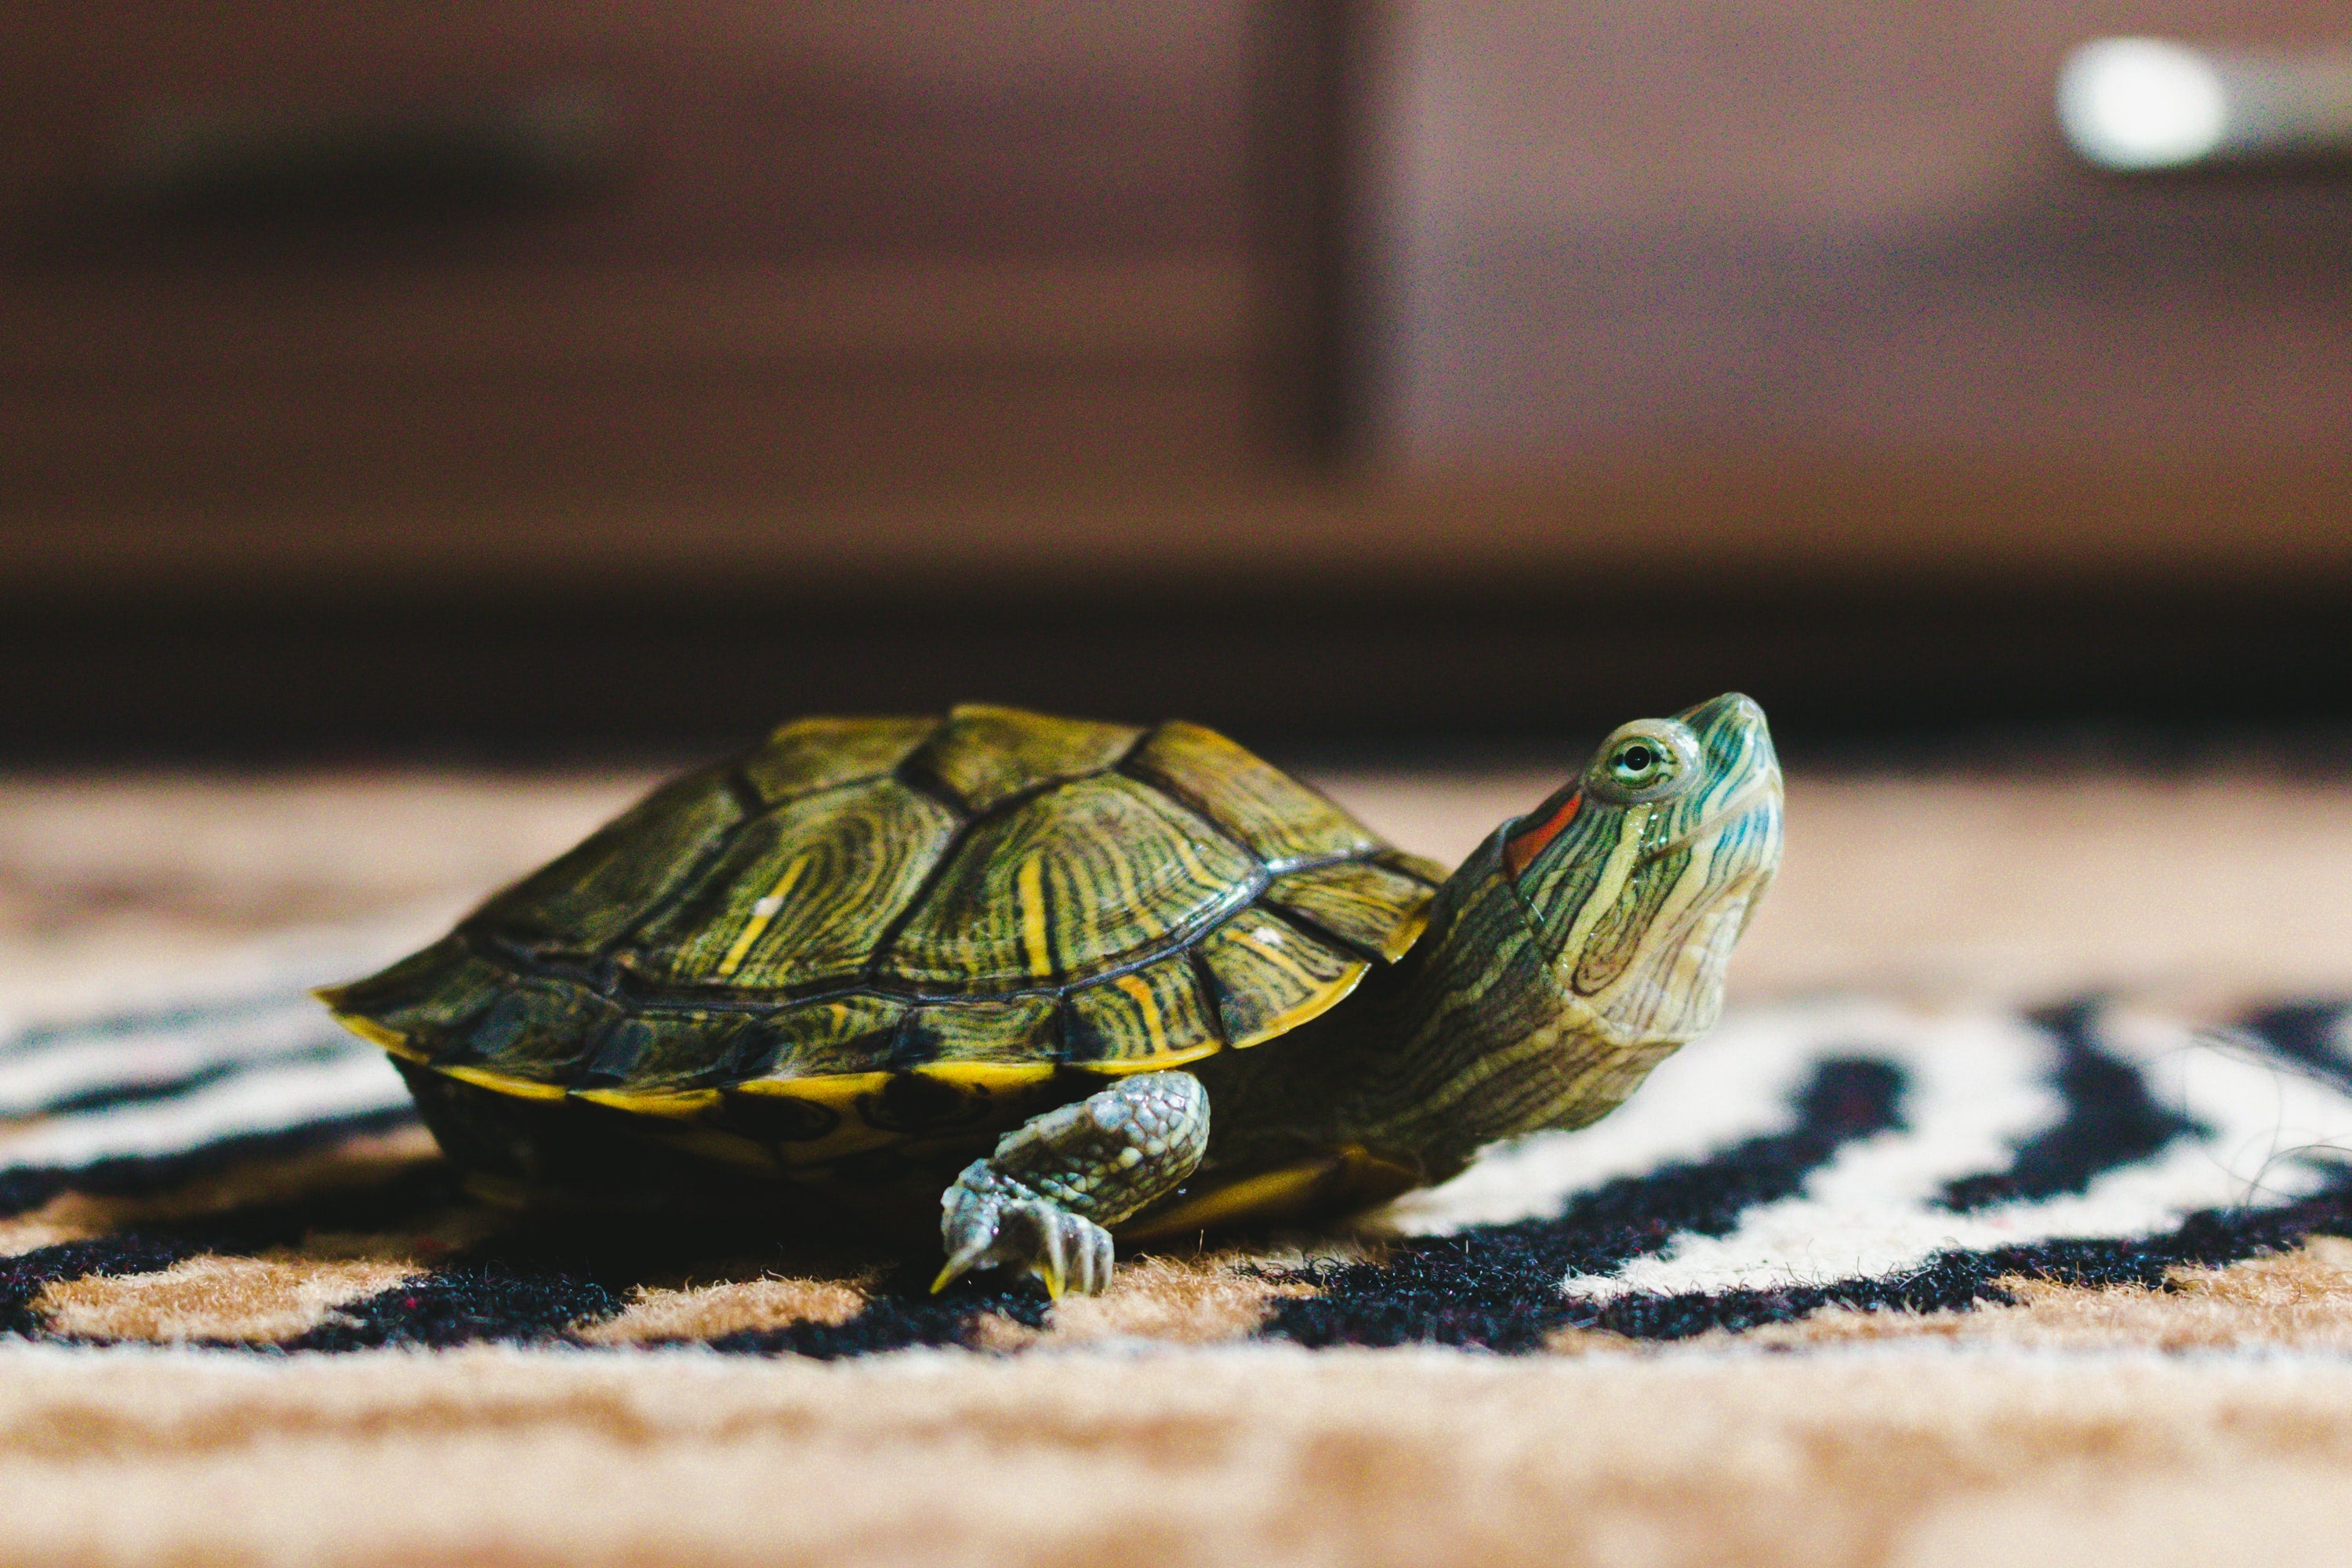 What Can I Feed My Pet Turtle?